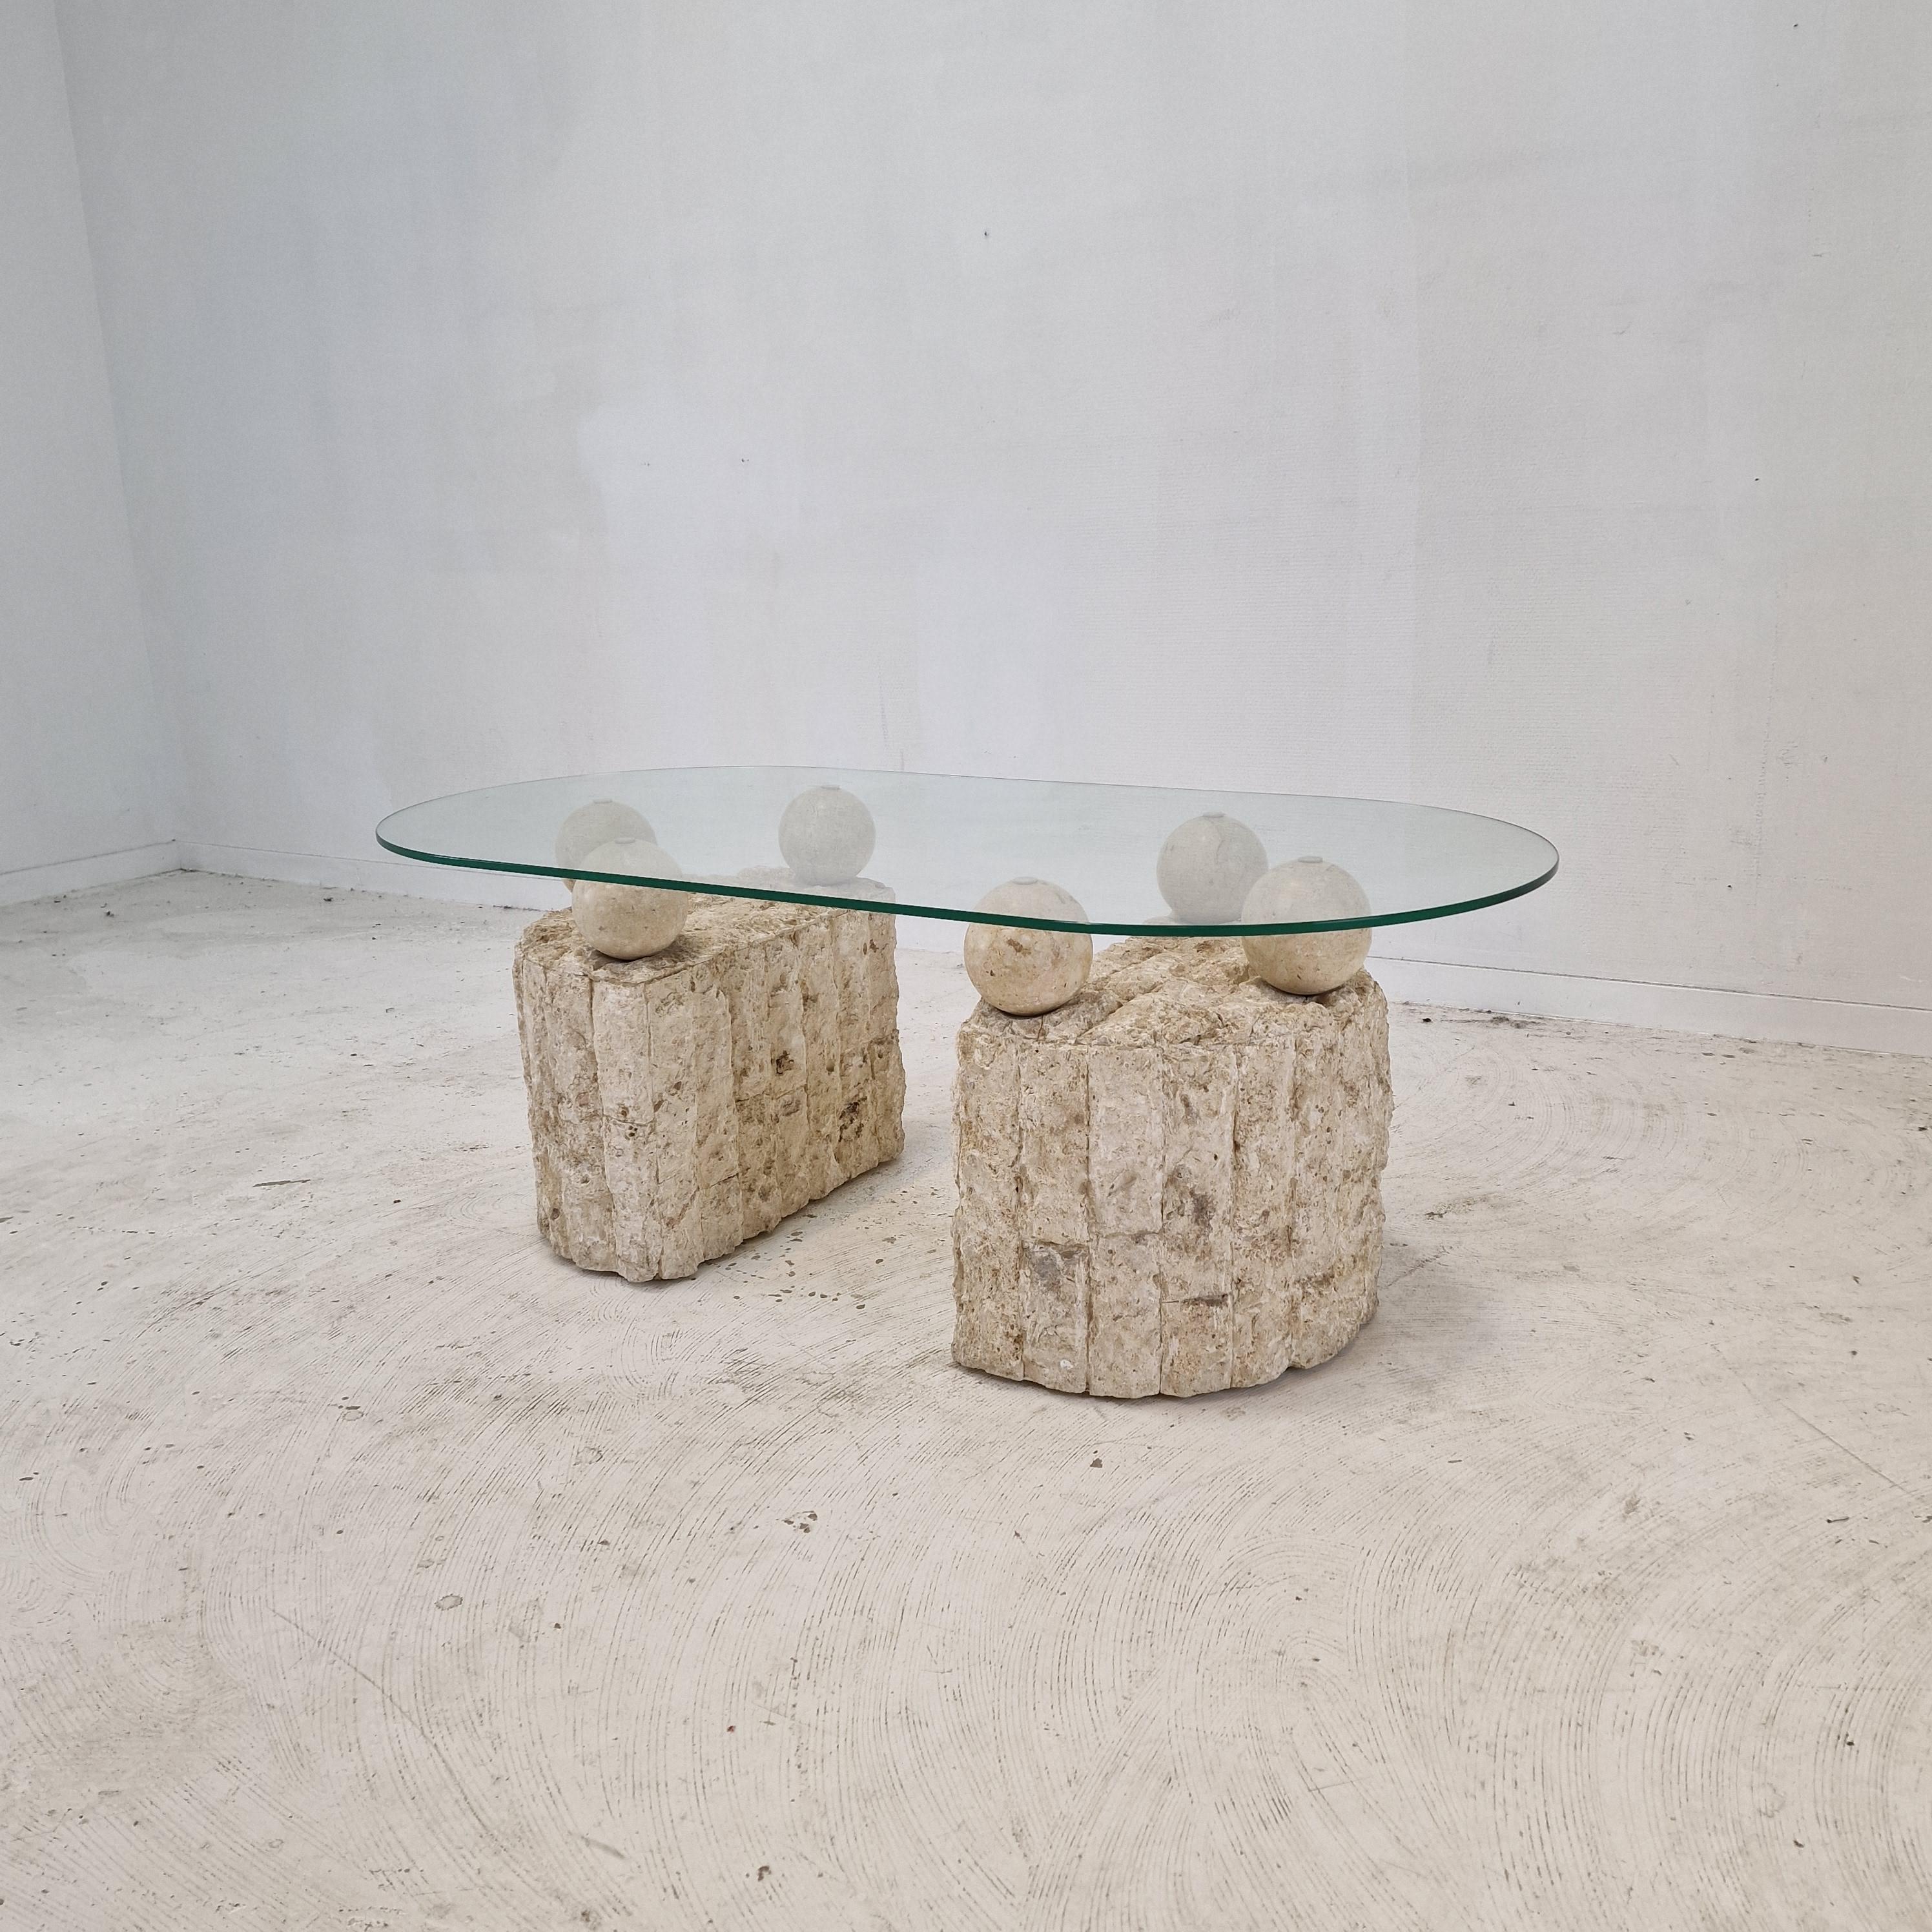 Post-Modern Magnussen Ponte Mactan Stone Coffee or Fossil Stone Table, 1980s For Sale